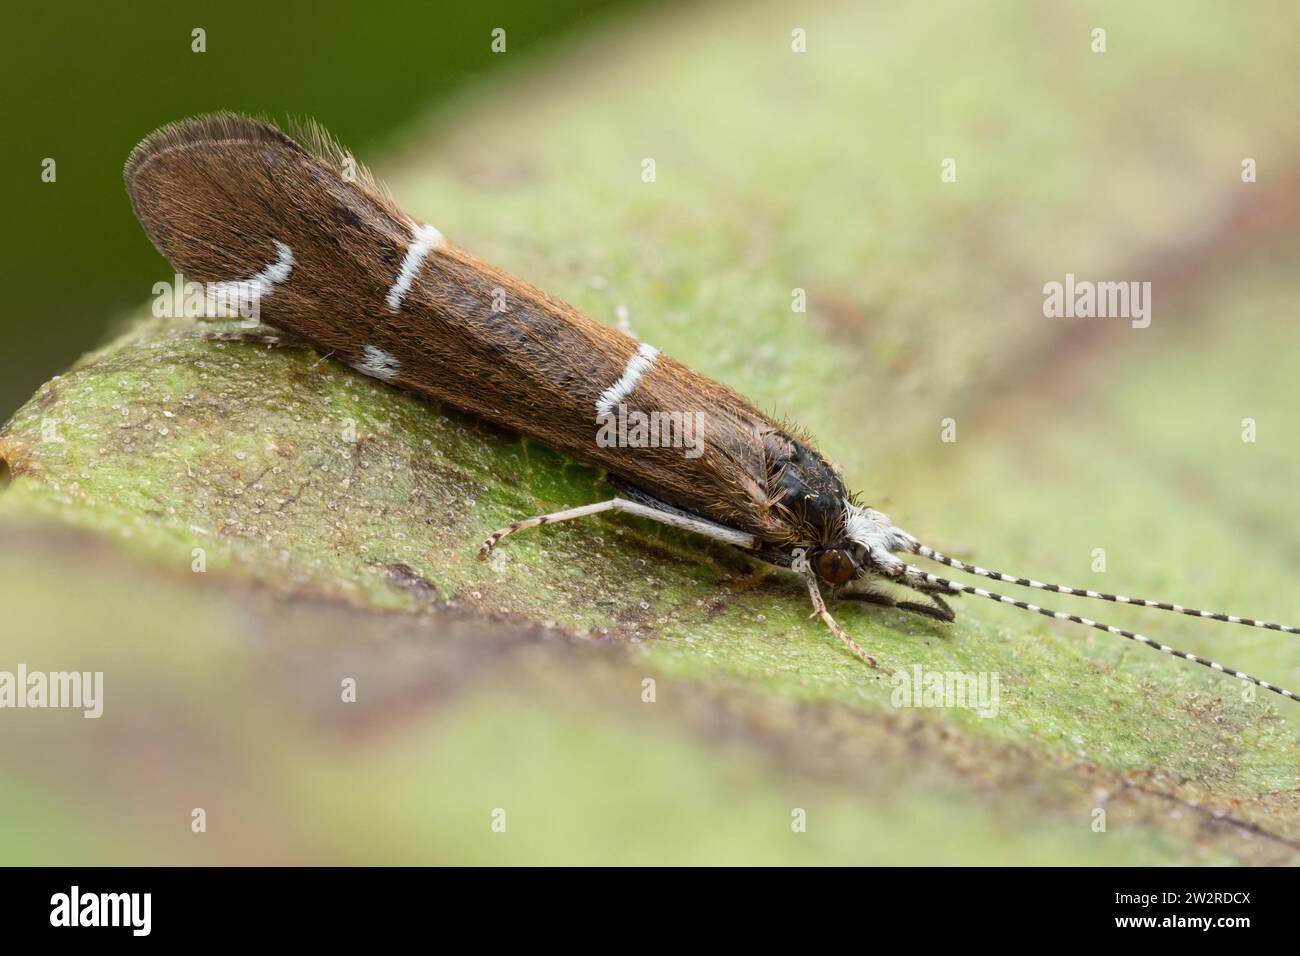 Athripsodes albifrons Caddisfly at rest on leaf. Tipperary, Ireland Stock Photo